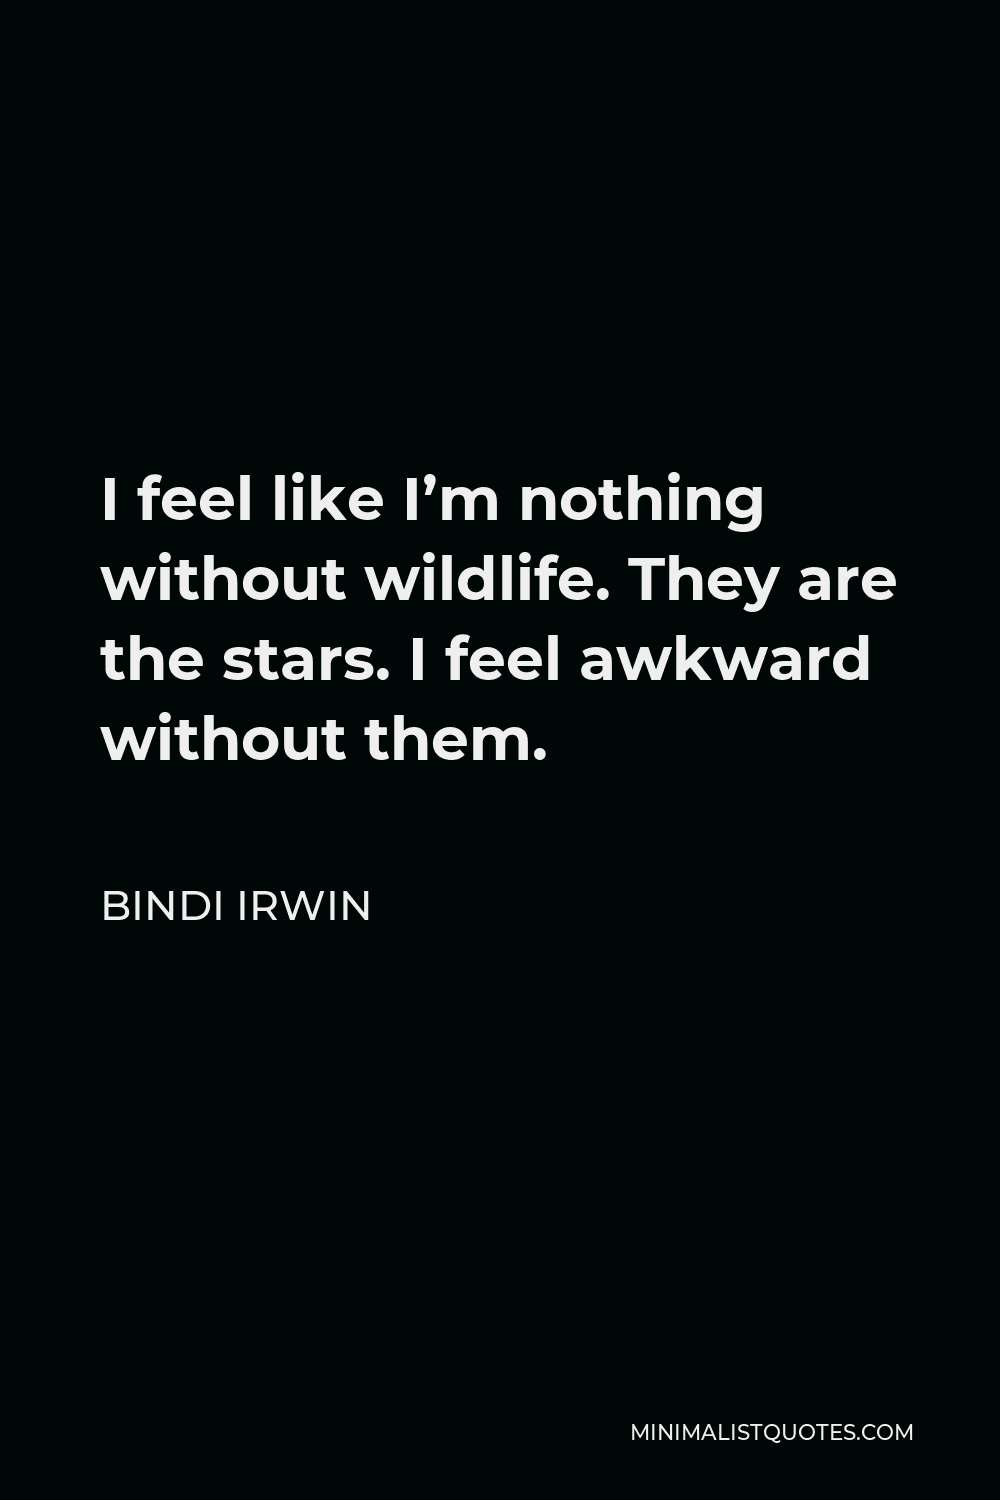 Bindi Irwin Quote - I feel like I’m nothing without wildlife. They are the stars. I feel awkward without them.